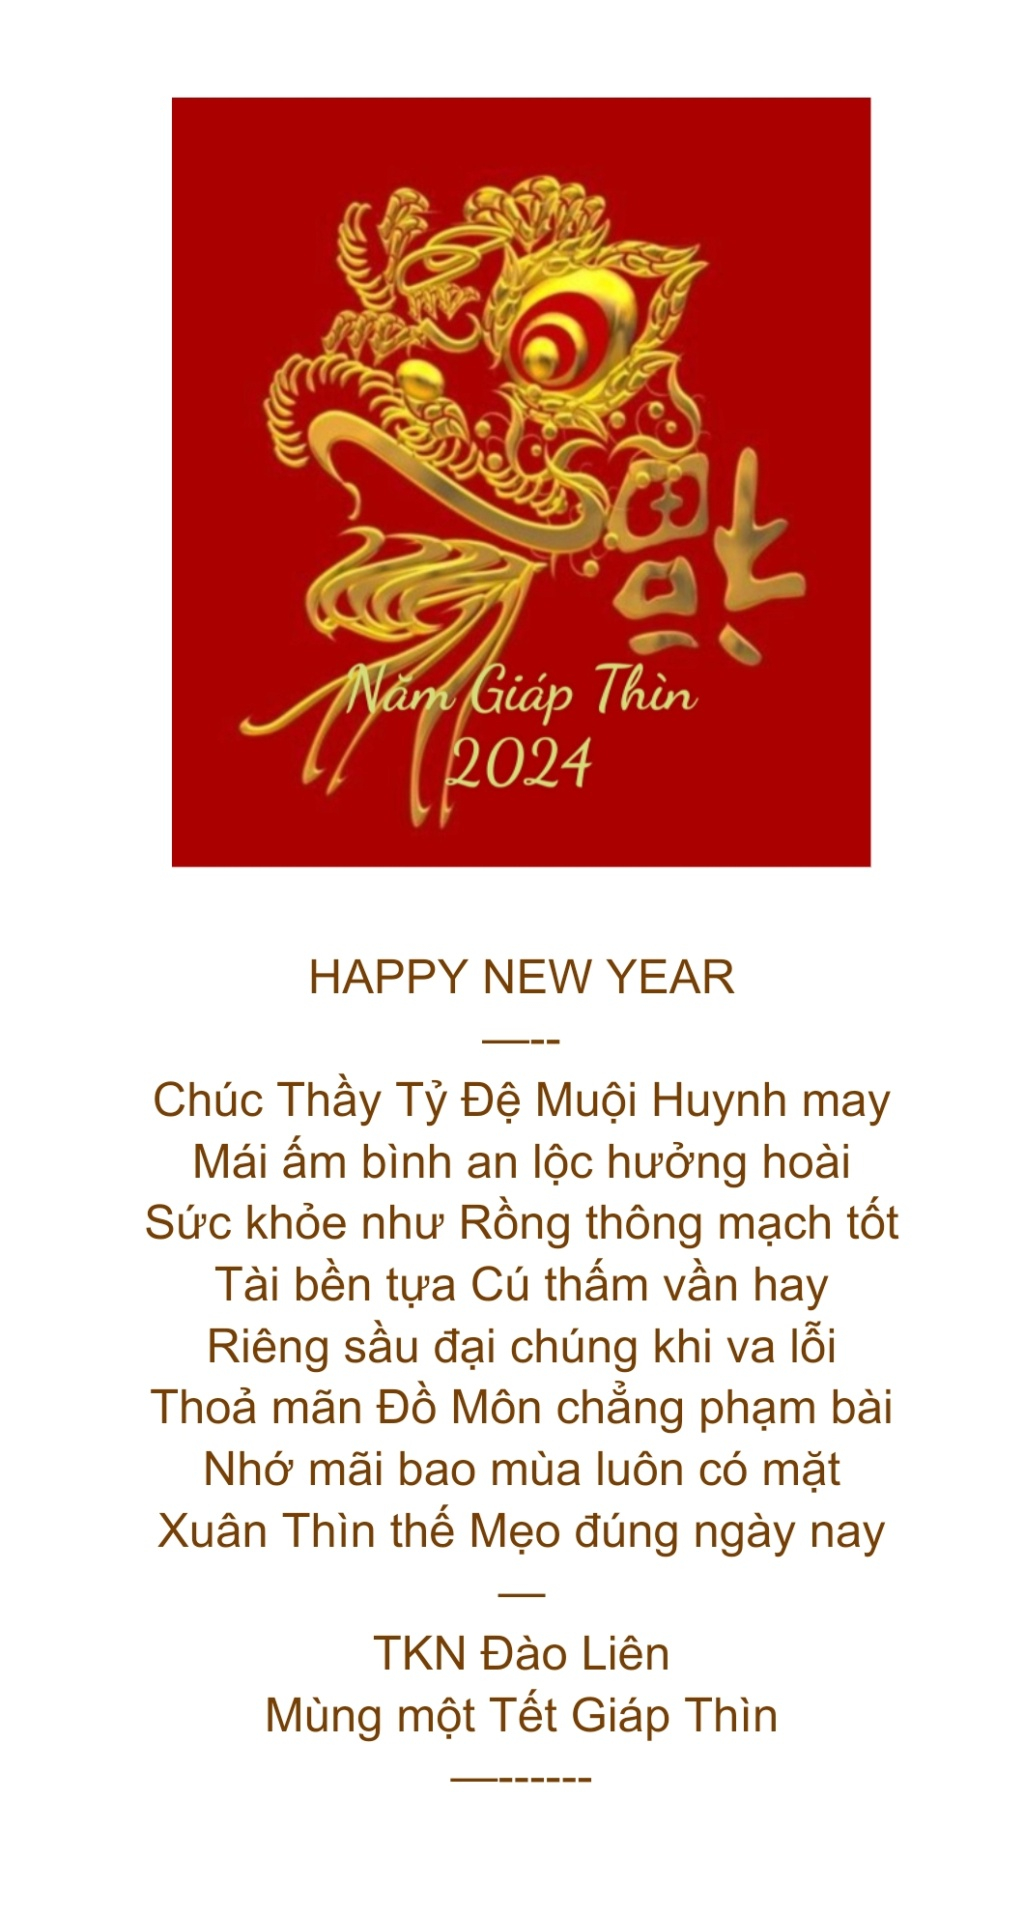 Happy New Year Thầy Tỷ Đệ Muội Huynh  Scre1110